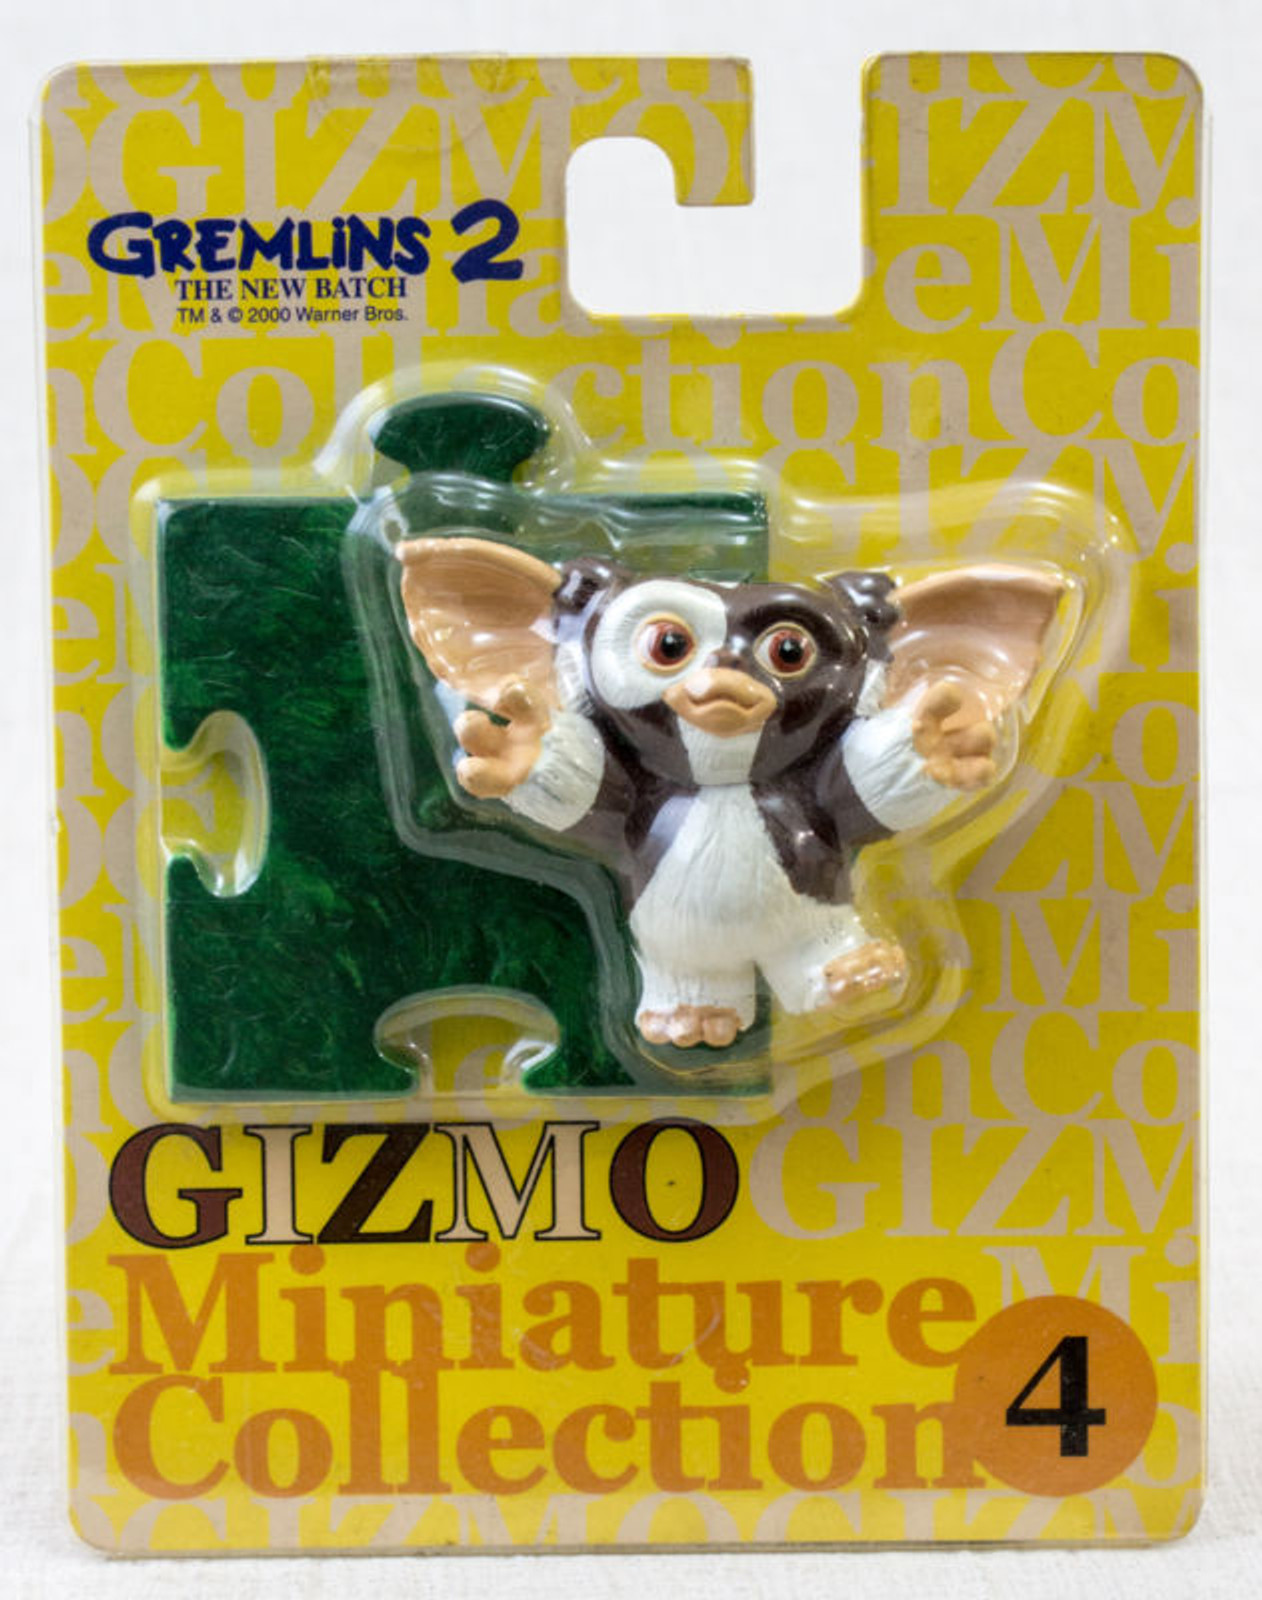 Gremlins 2 The New Batch Gizmo Miniature Figure Collection #4 Jun Planning JAPAN